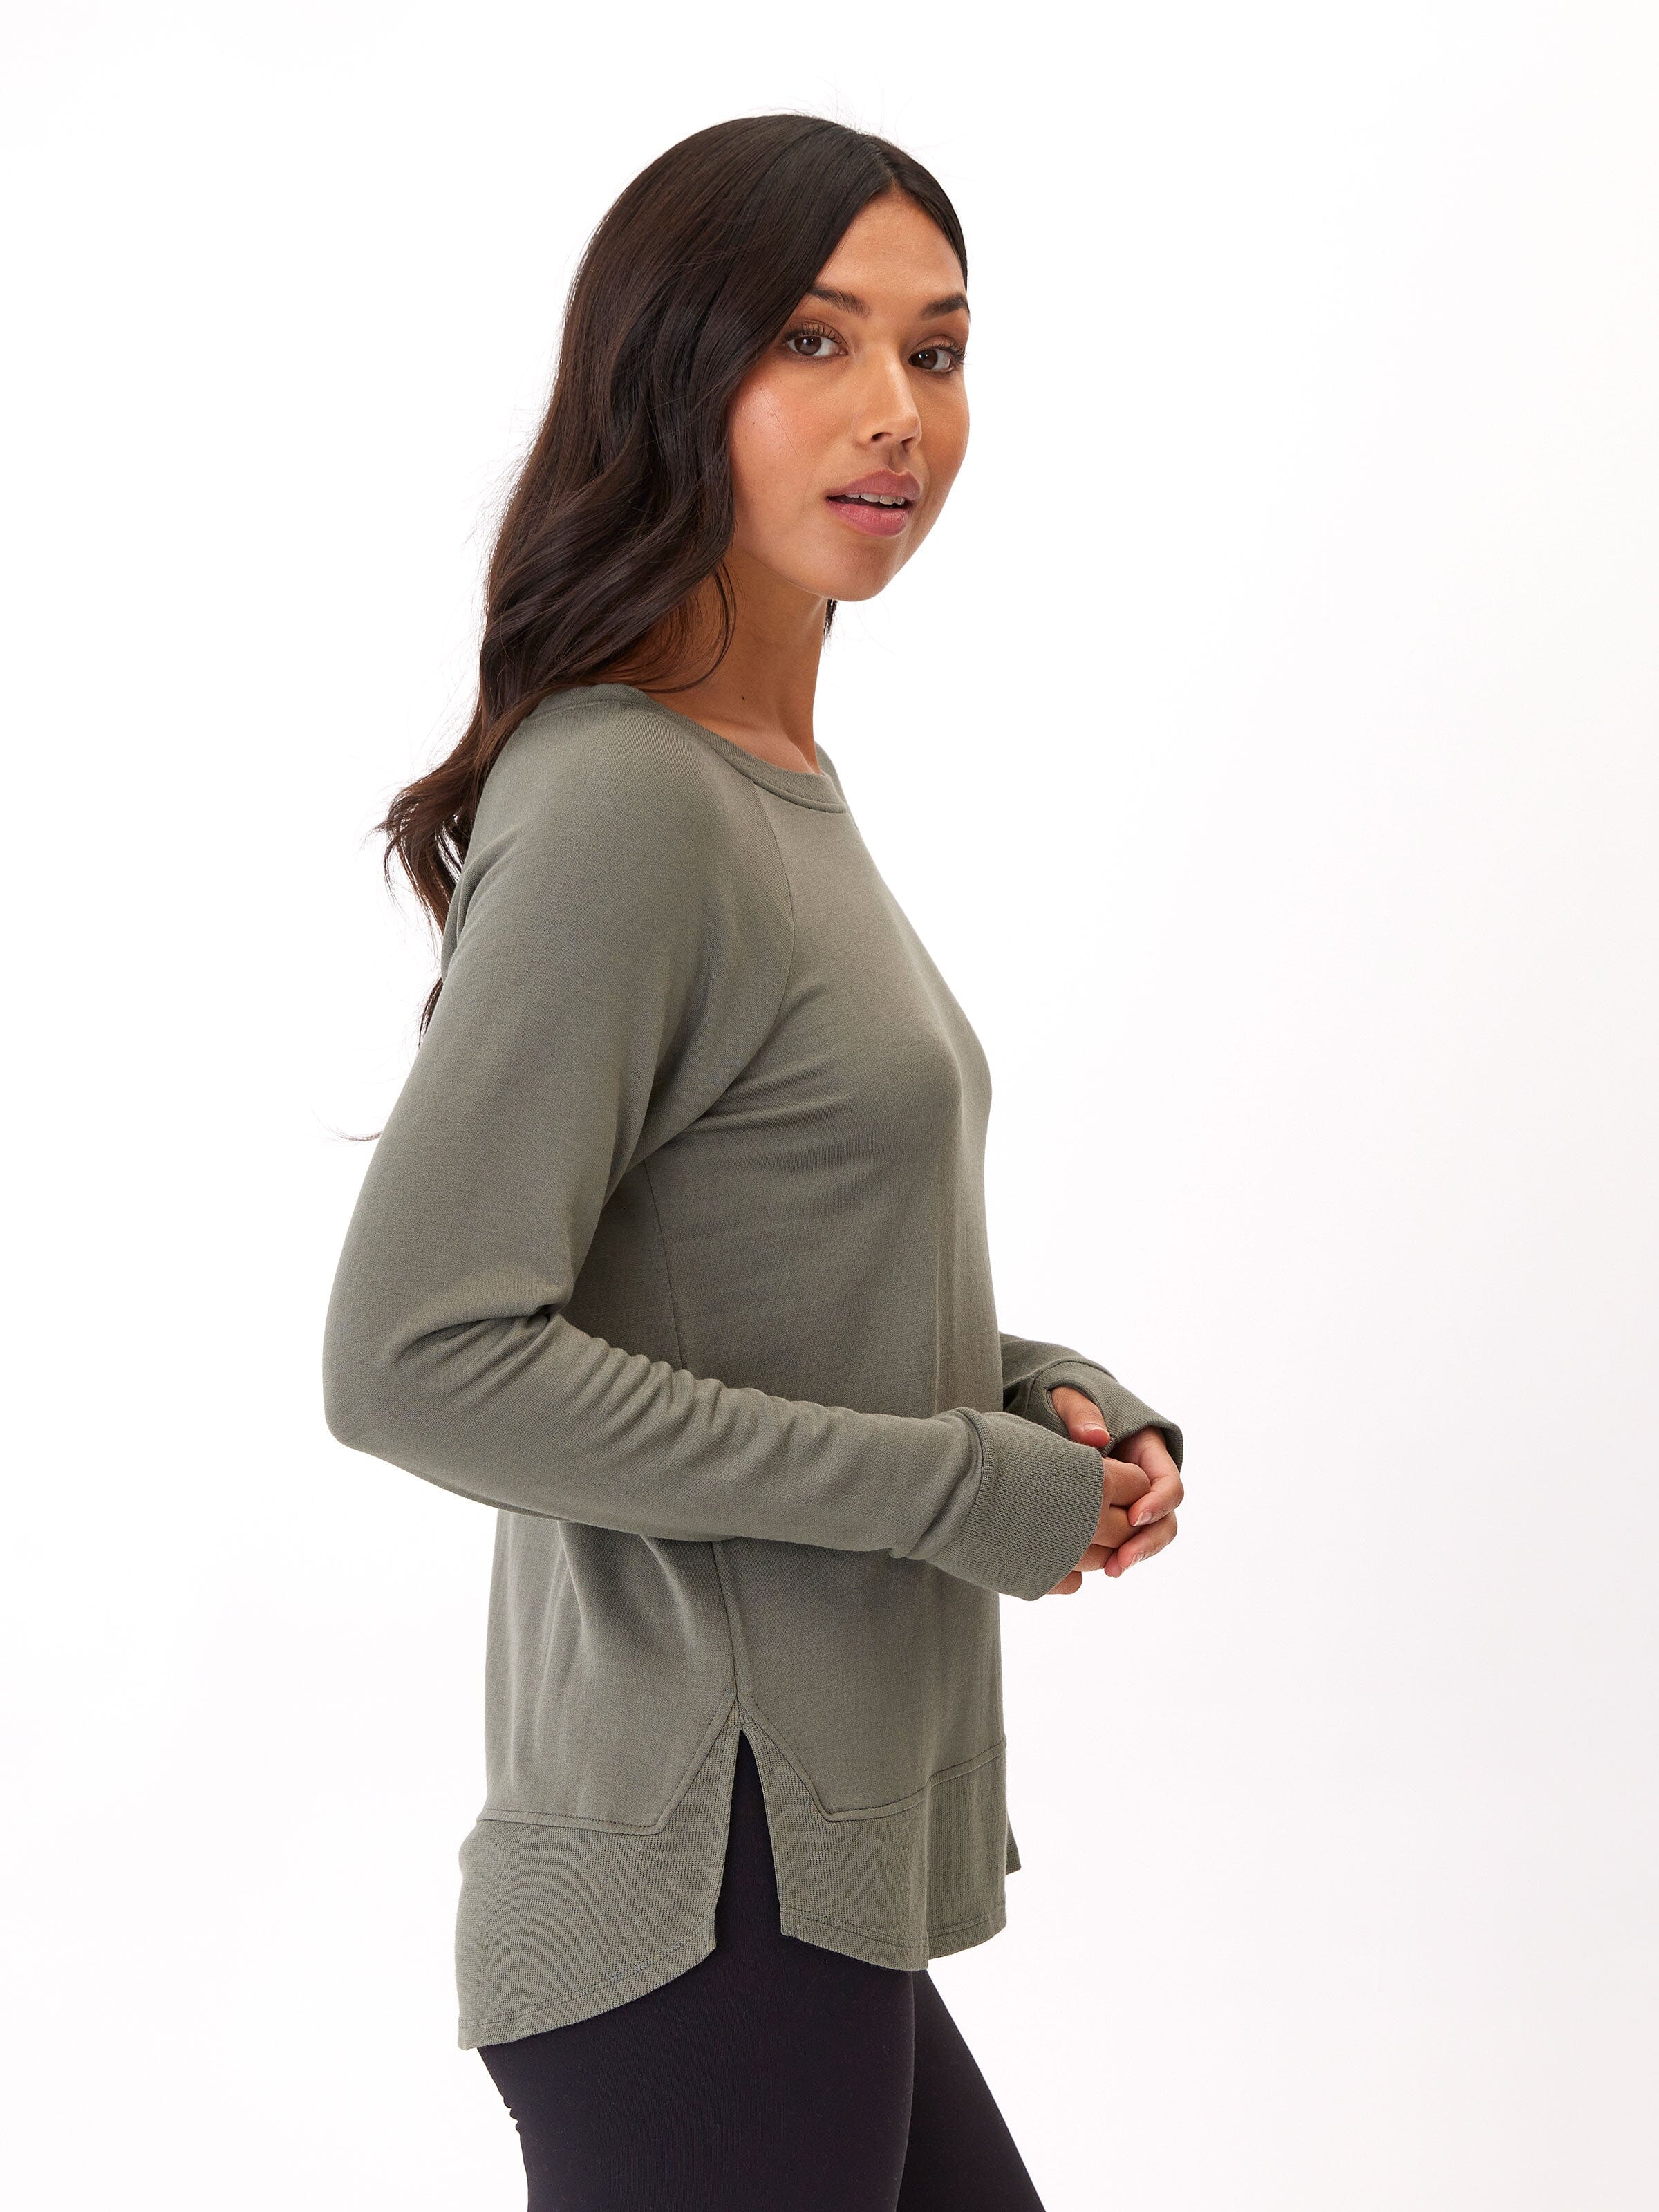 Feather Tech Long-Sleeve Top  Long sleeve tops, Long tops, Active wear for  women